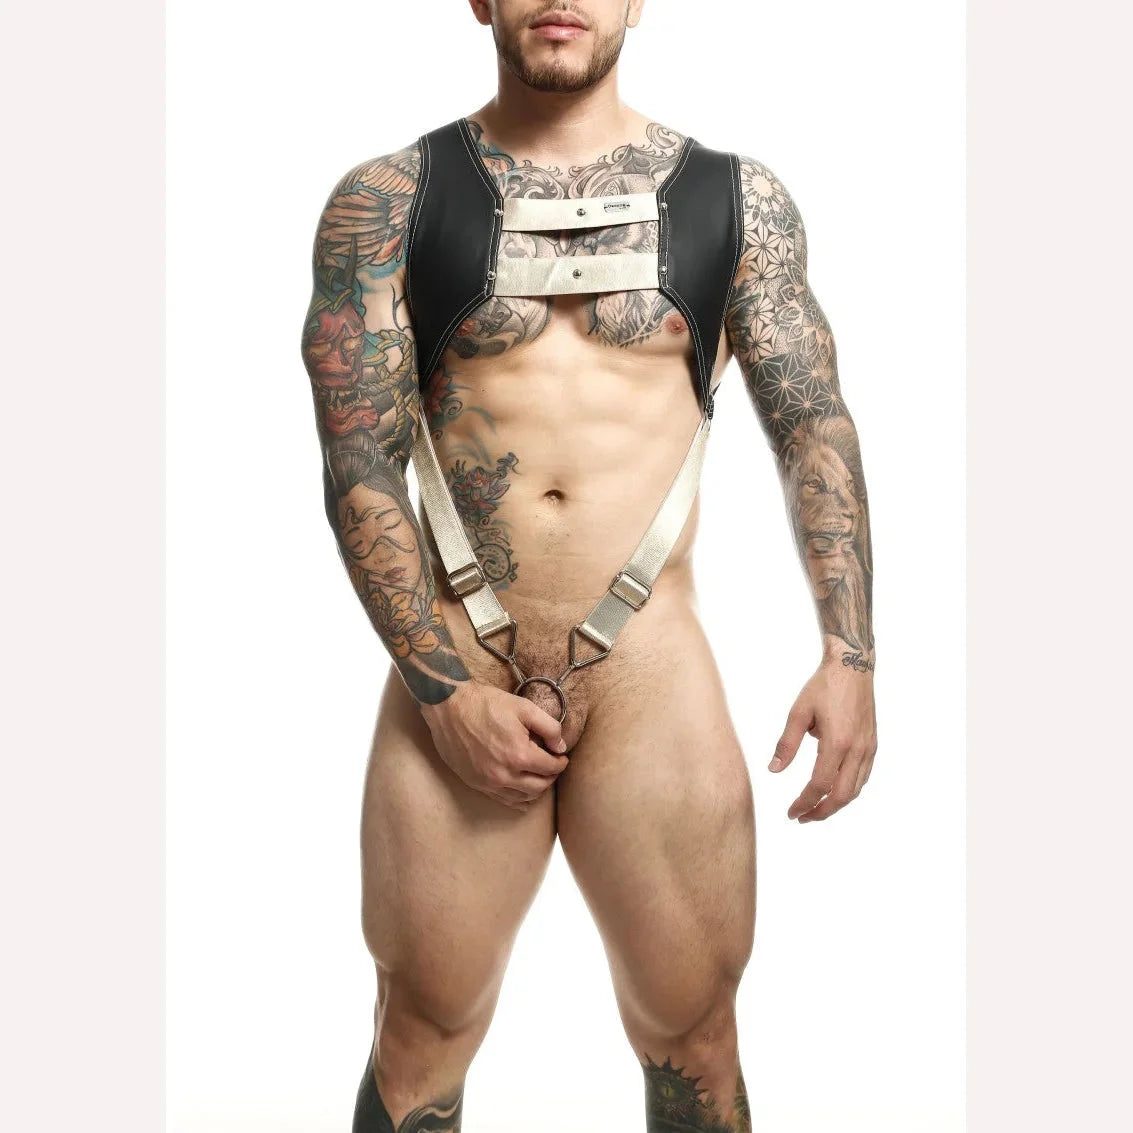 Male Basics Dngeon Croptop Cockring Harness Golden O/s Intimates Adult Boutique